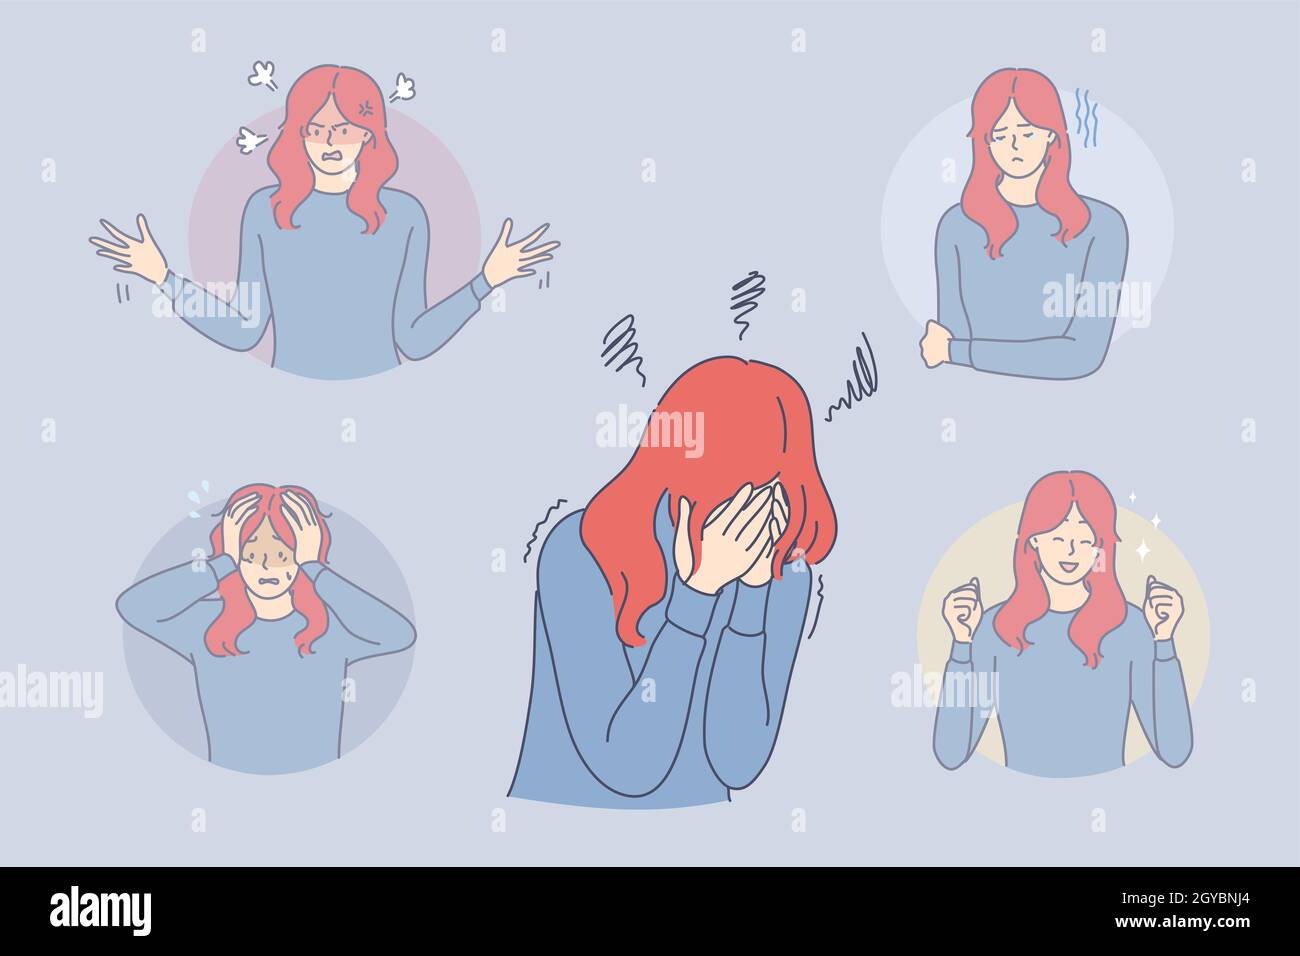 Bipolar disorder, phycological problem, schizophrenia concept. Young depressed woman cartoon character suffering from bipolar disorder with euphoria, Stock Photo